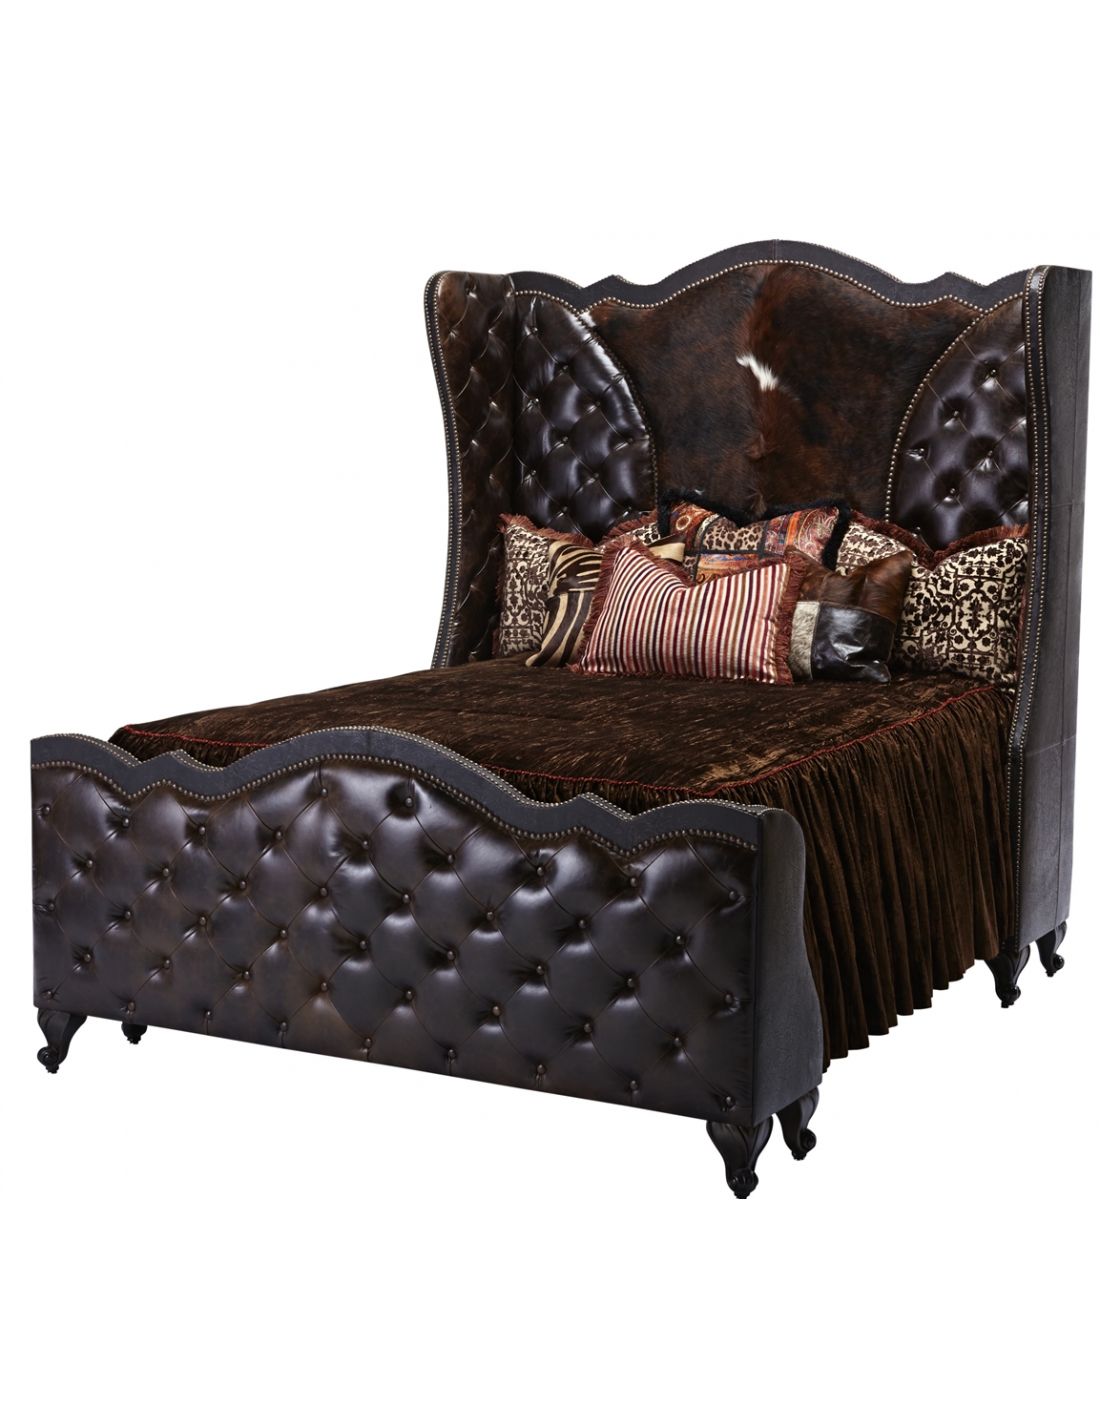 Grand Tufted Headboard With Wingback, Grand King Bed Frame